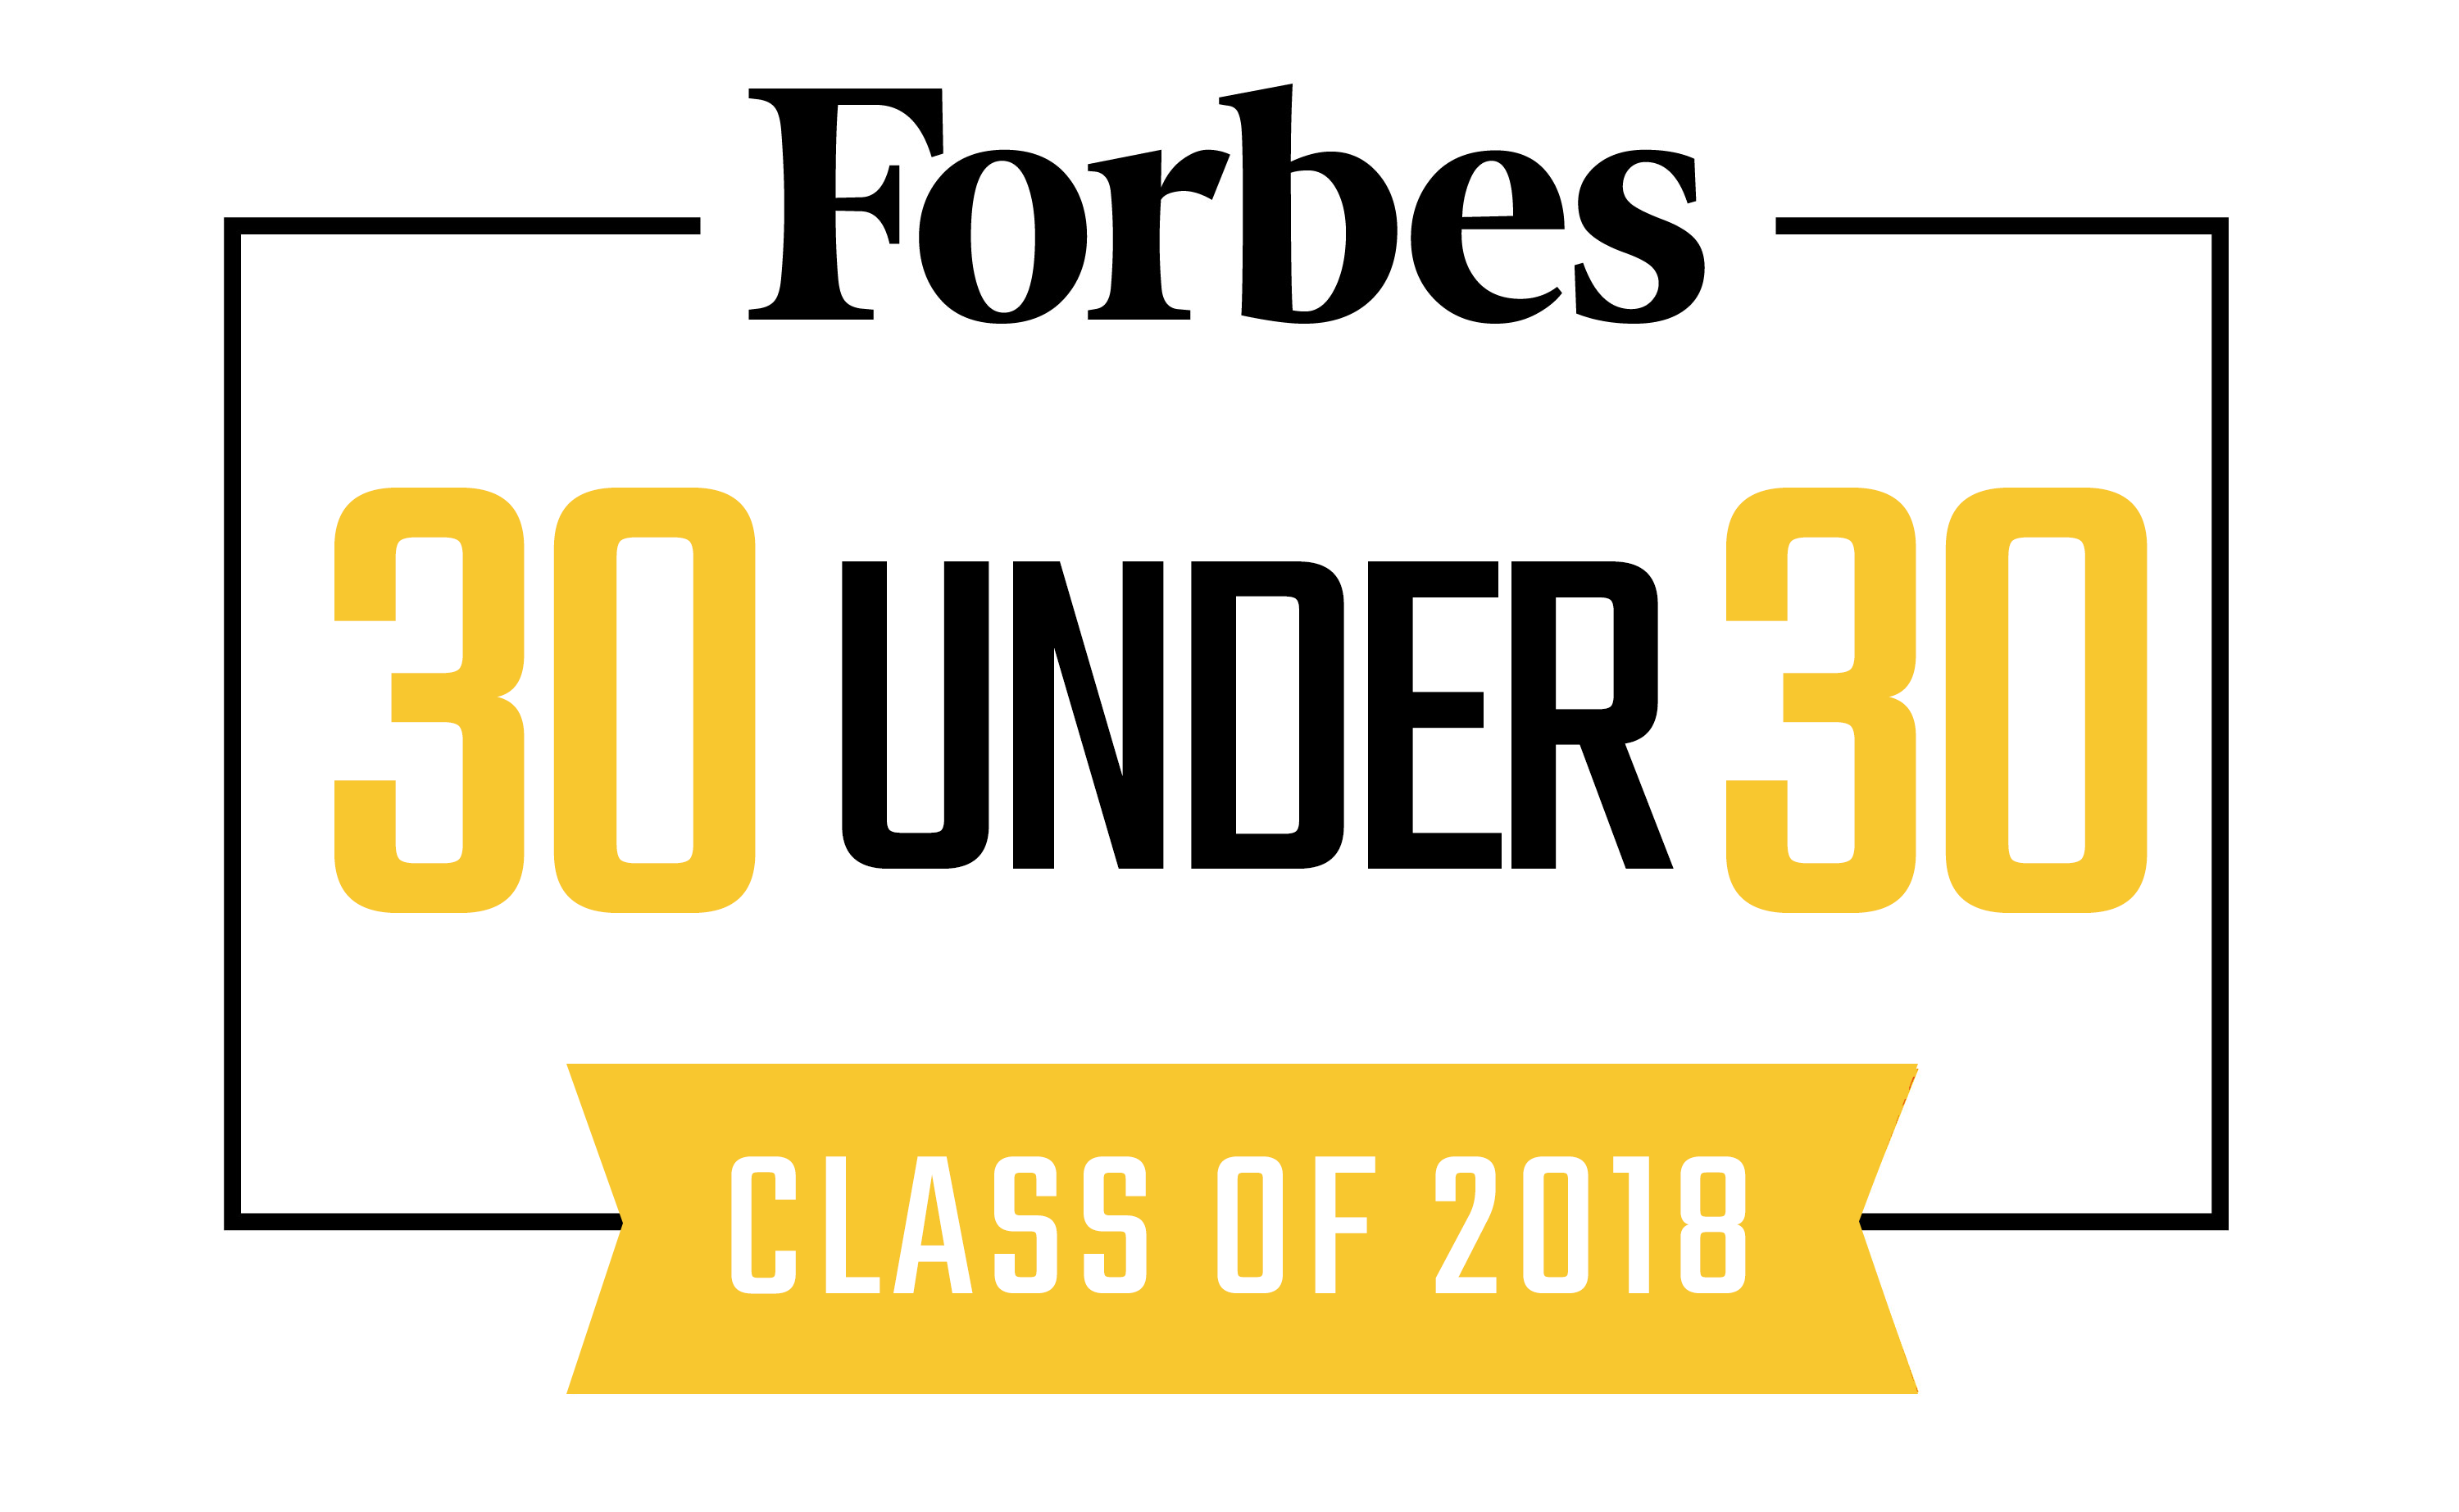 Scott Stiles co-founder of Fair Employment Agency is named on the 2018 Forbes 30 Under 30 Asia list